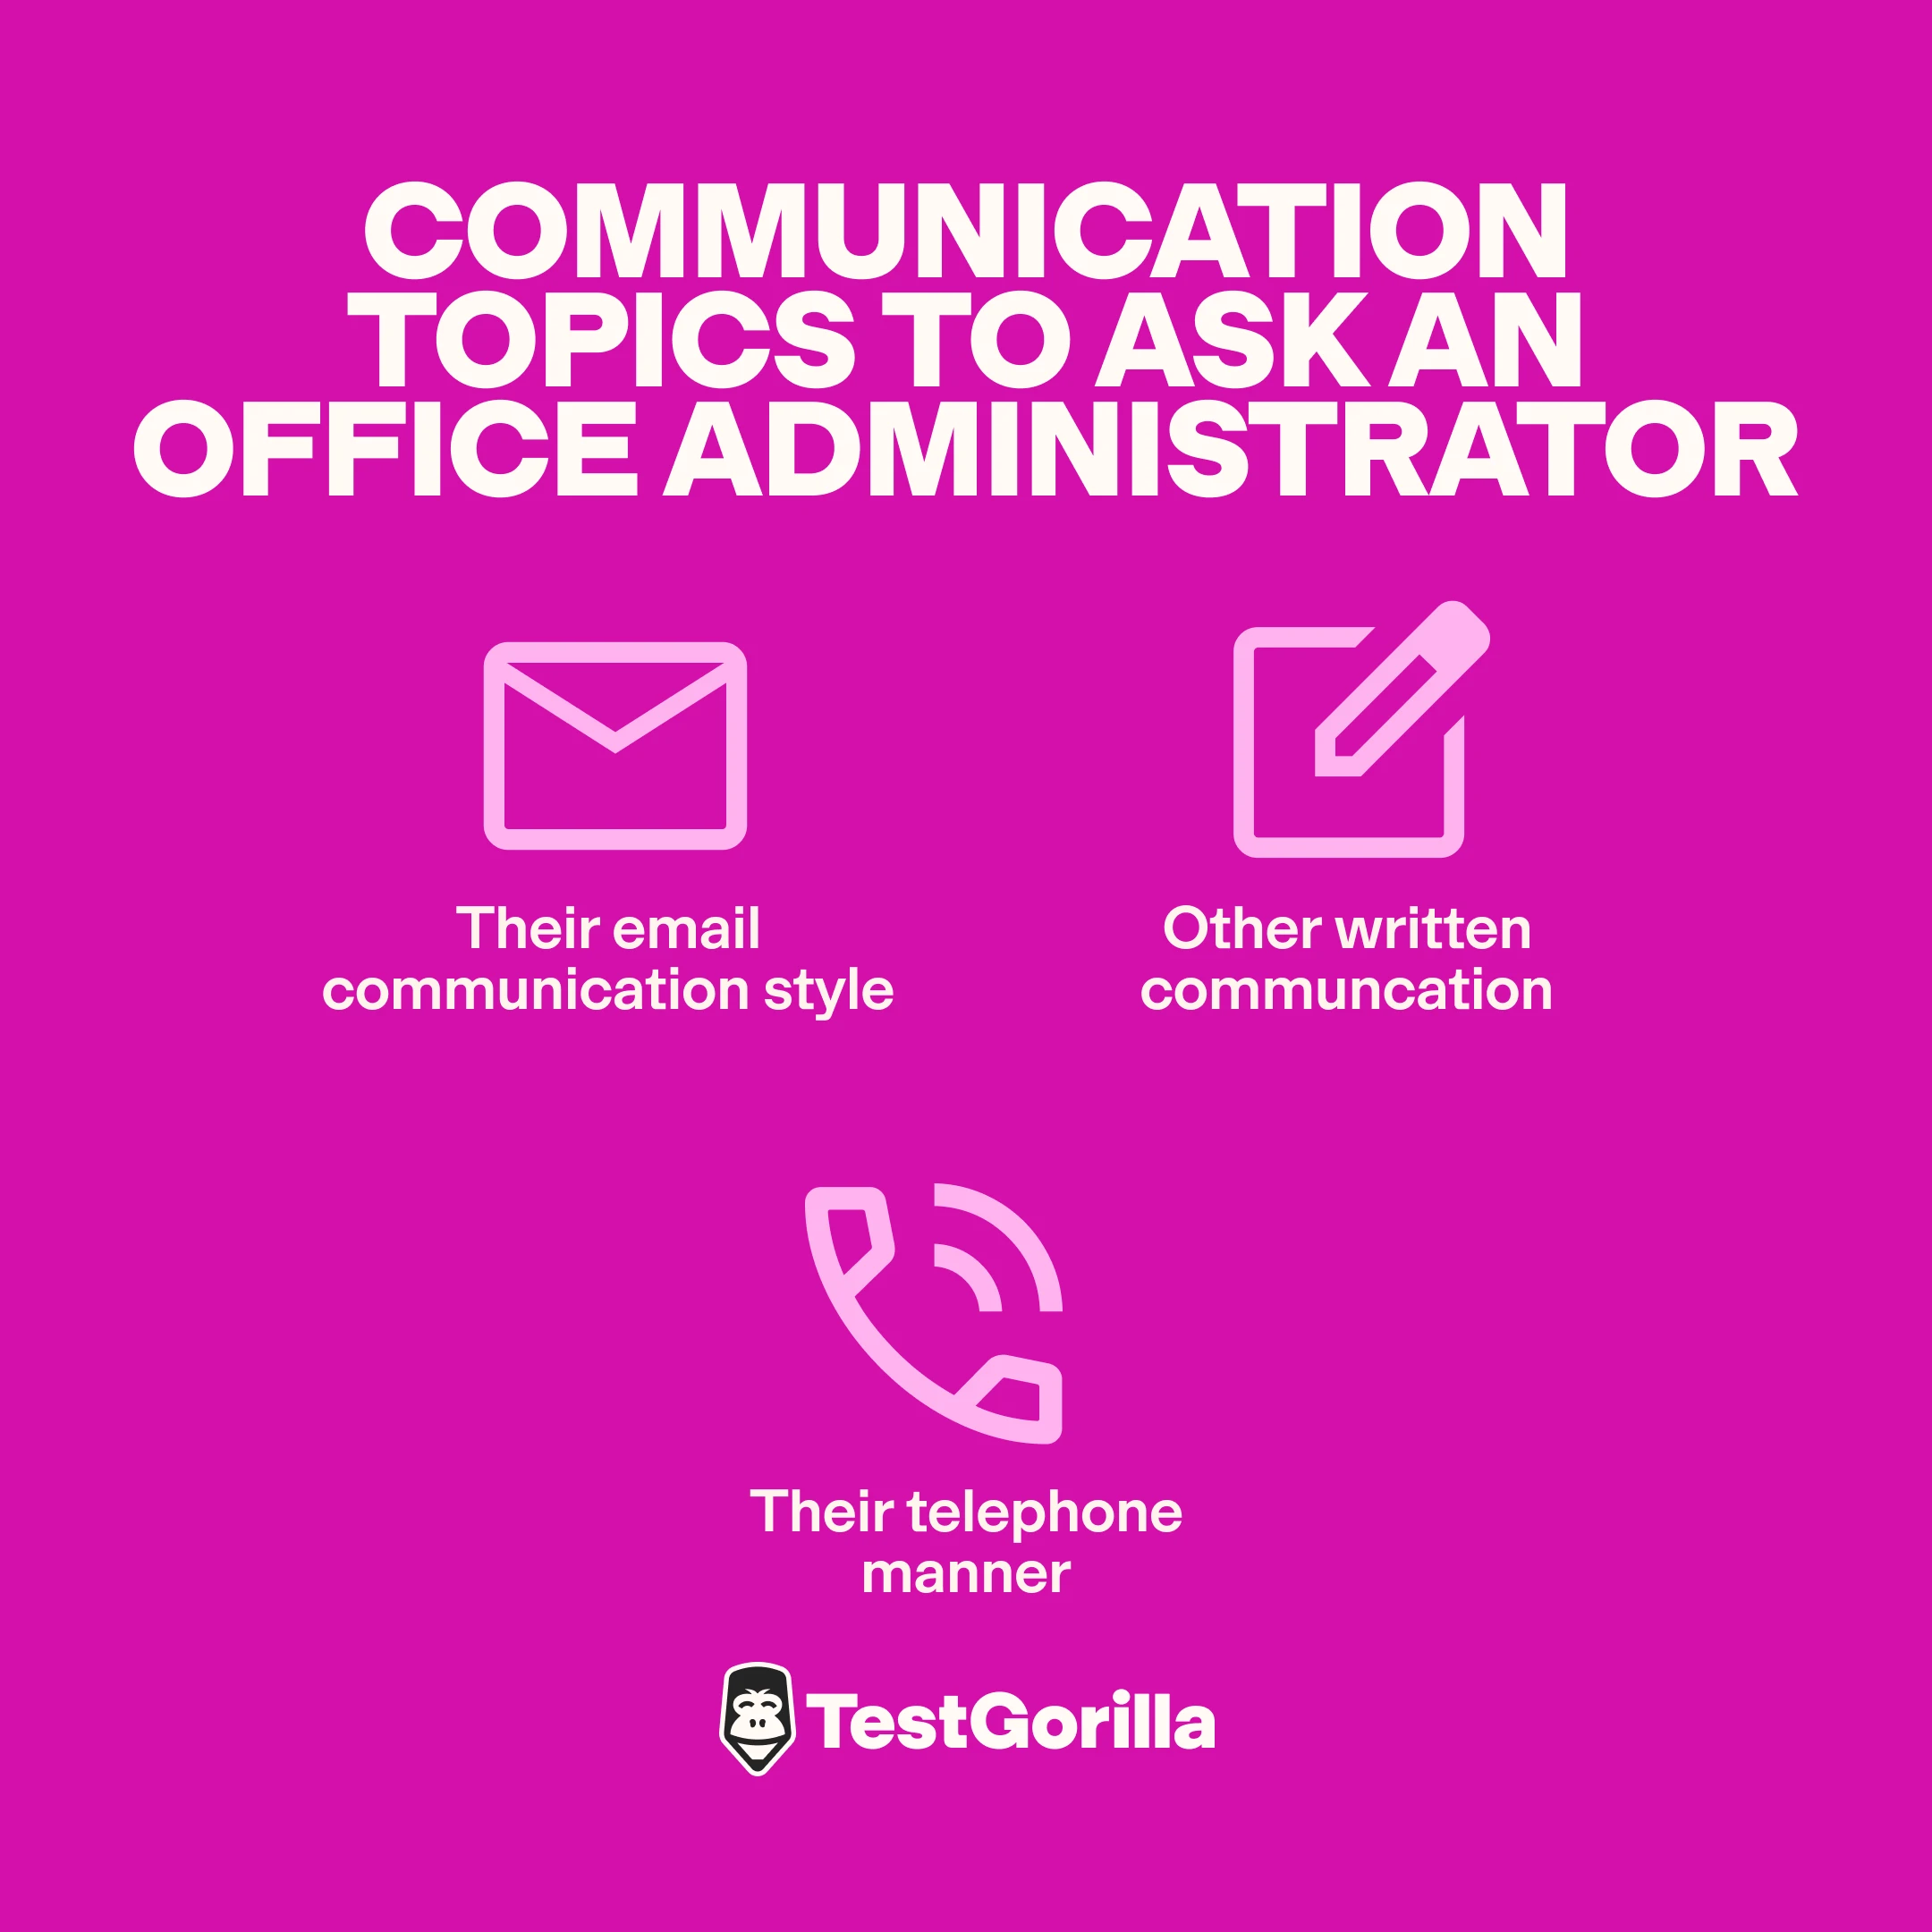 Communication topics to ask an office administrator graphic